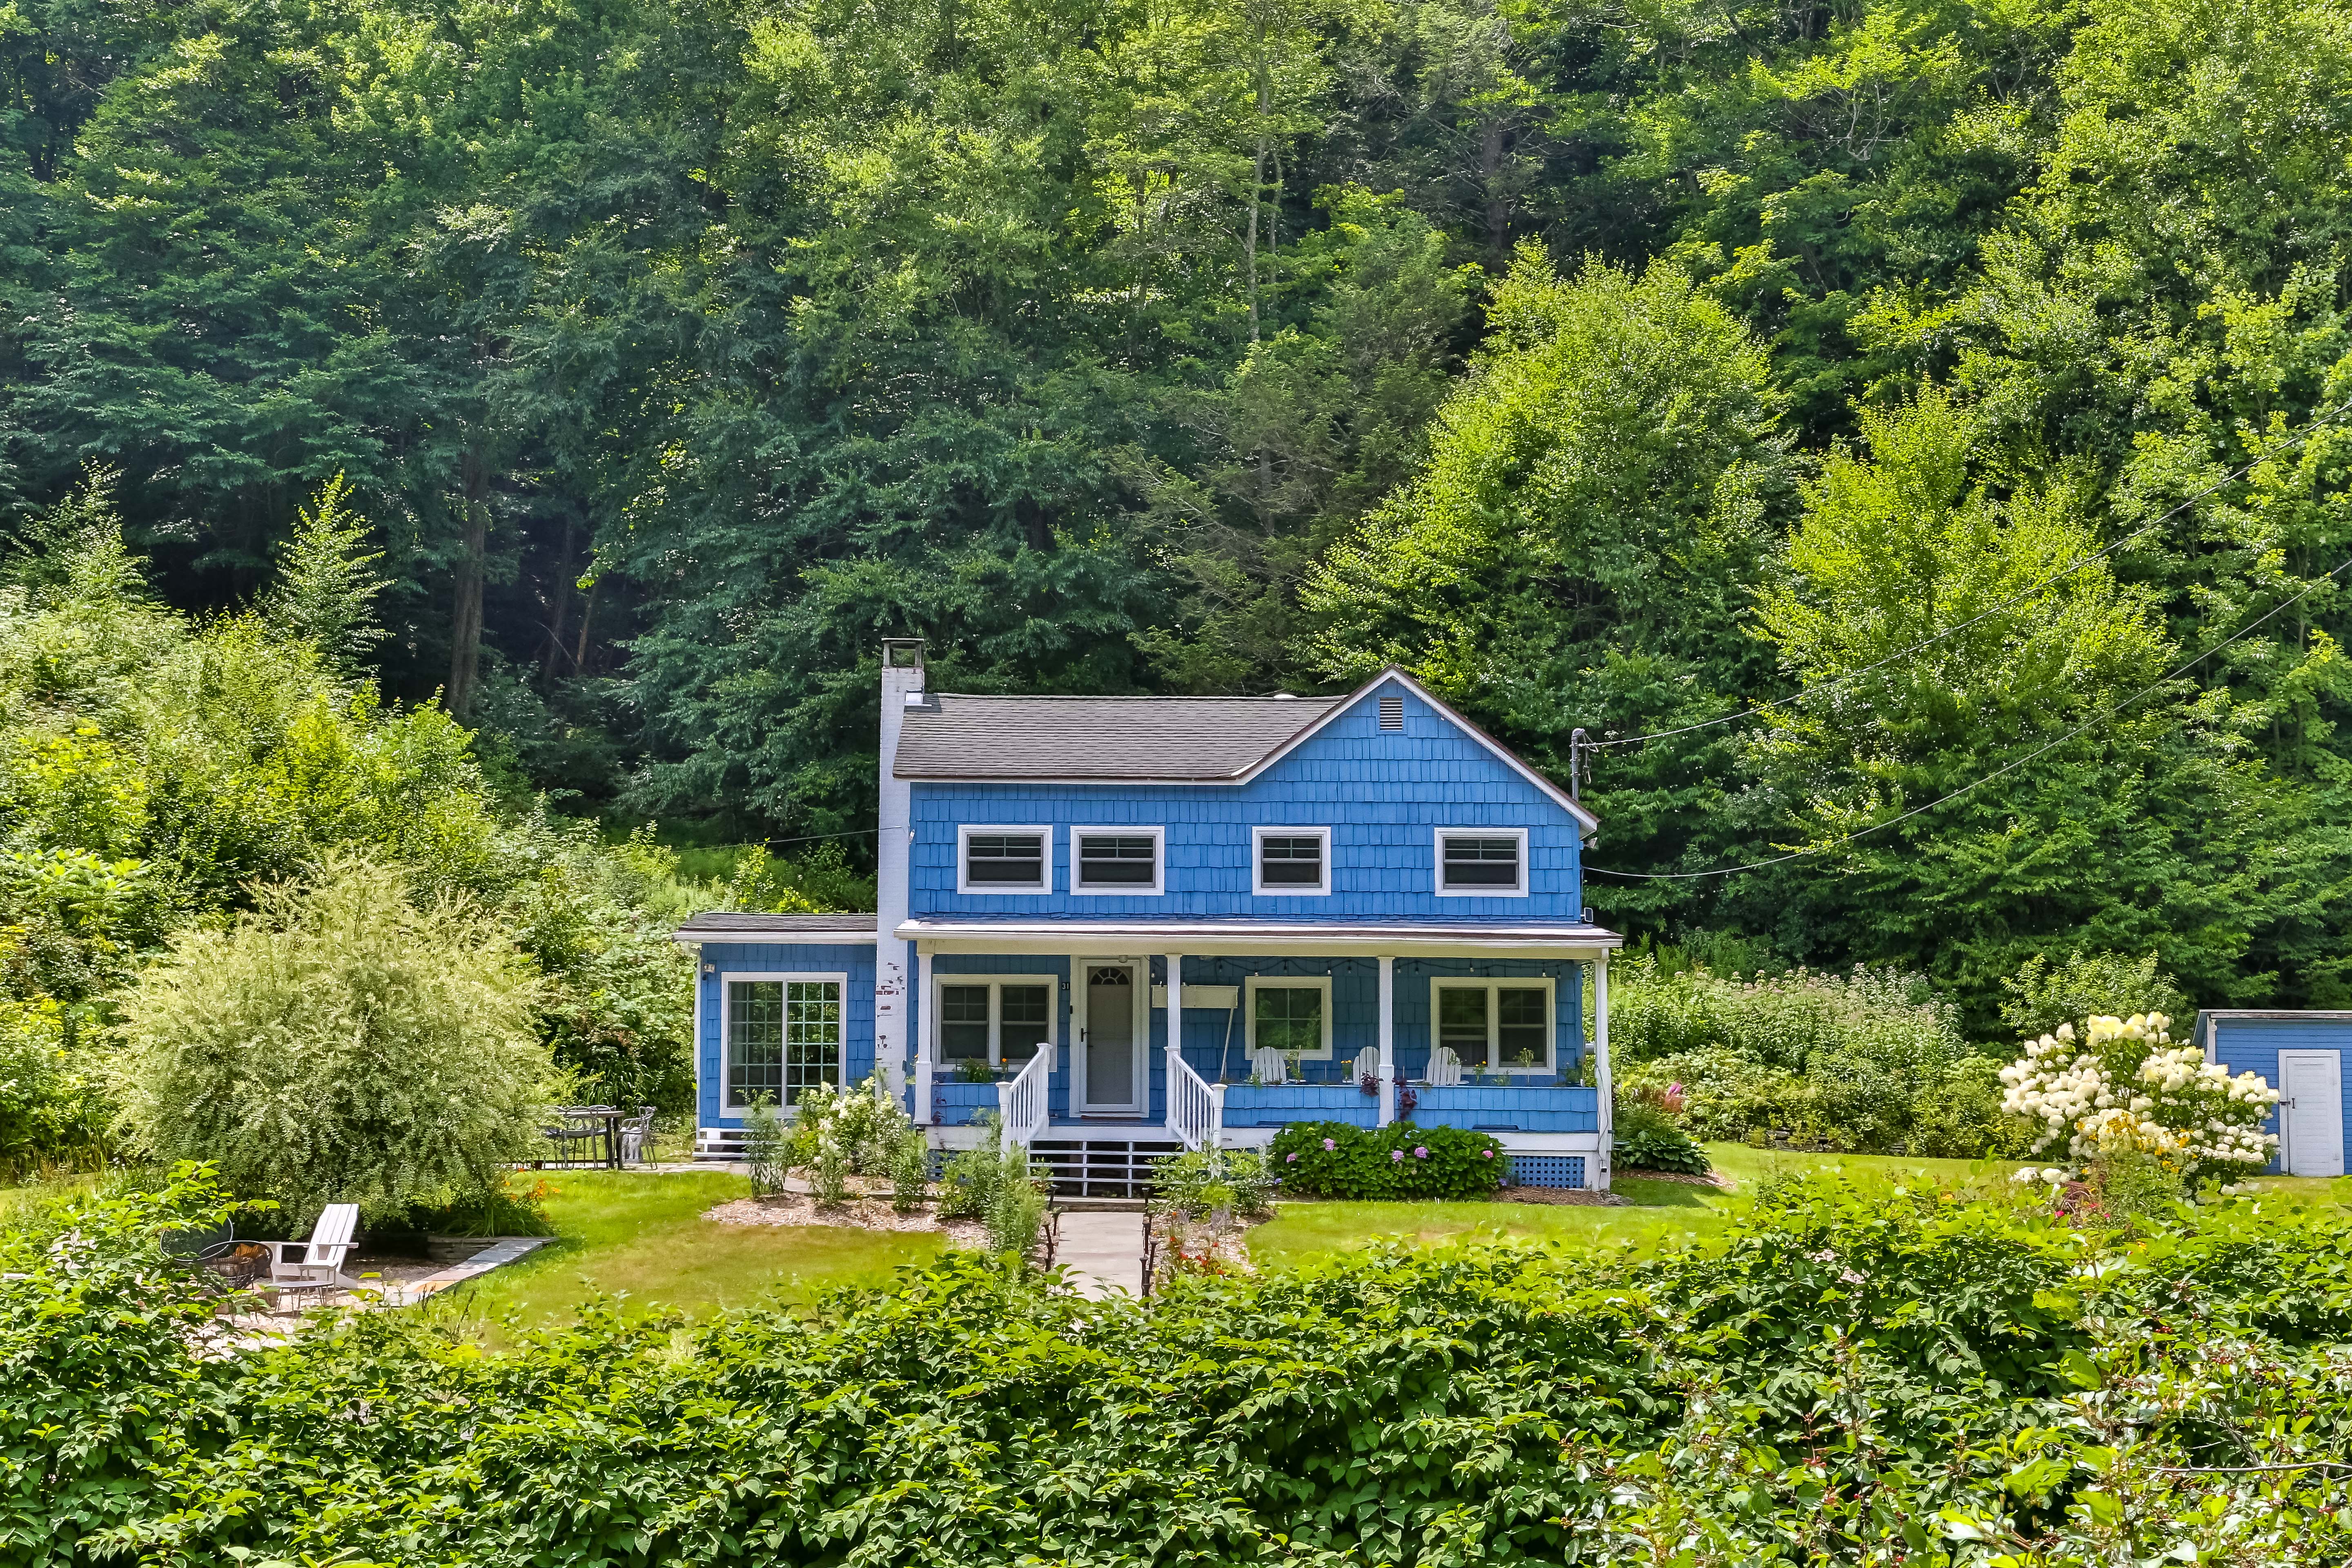 A blue shingled house at the base of a forest with hydrangeas and lush greenery surrounding its large property.